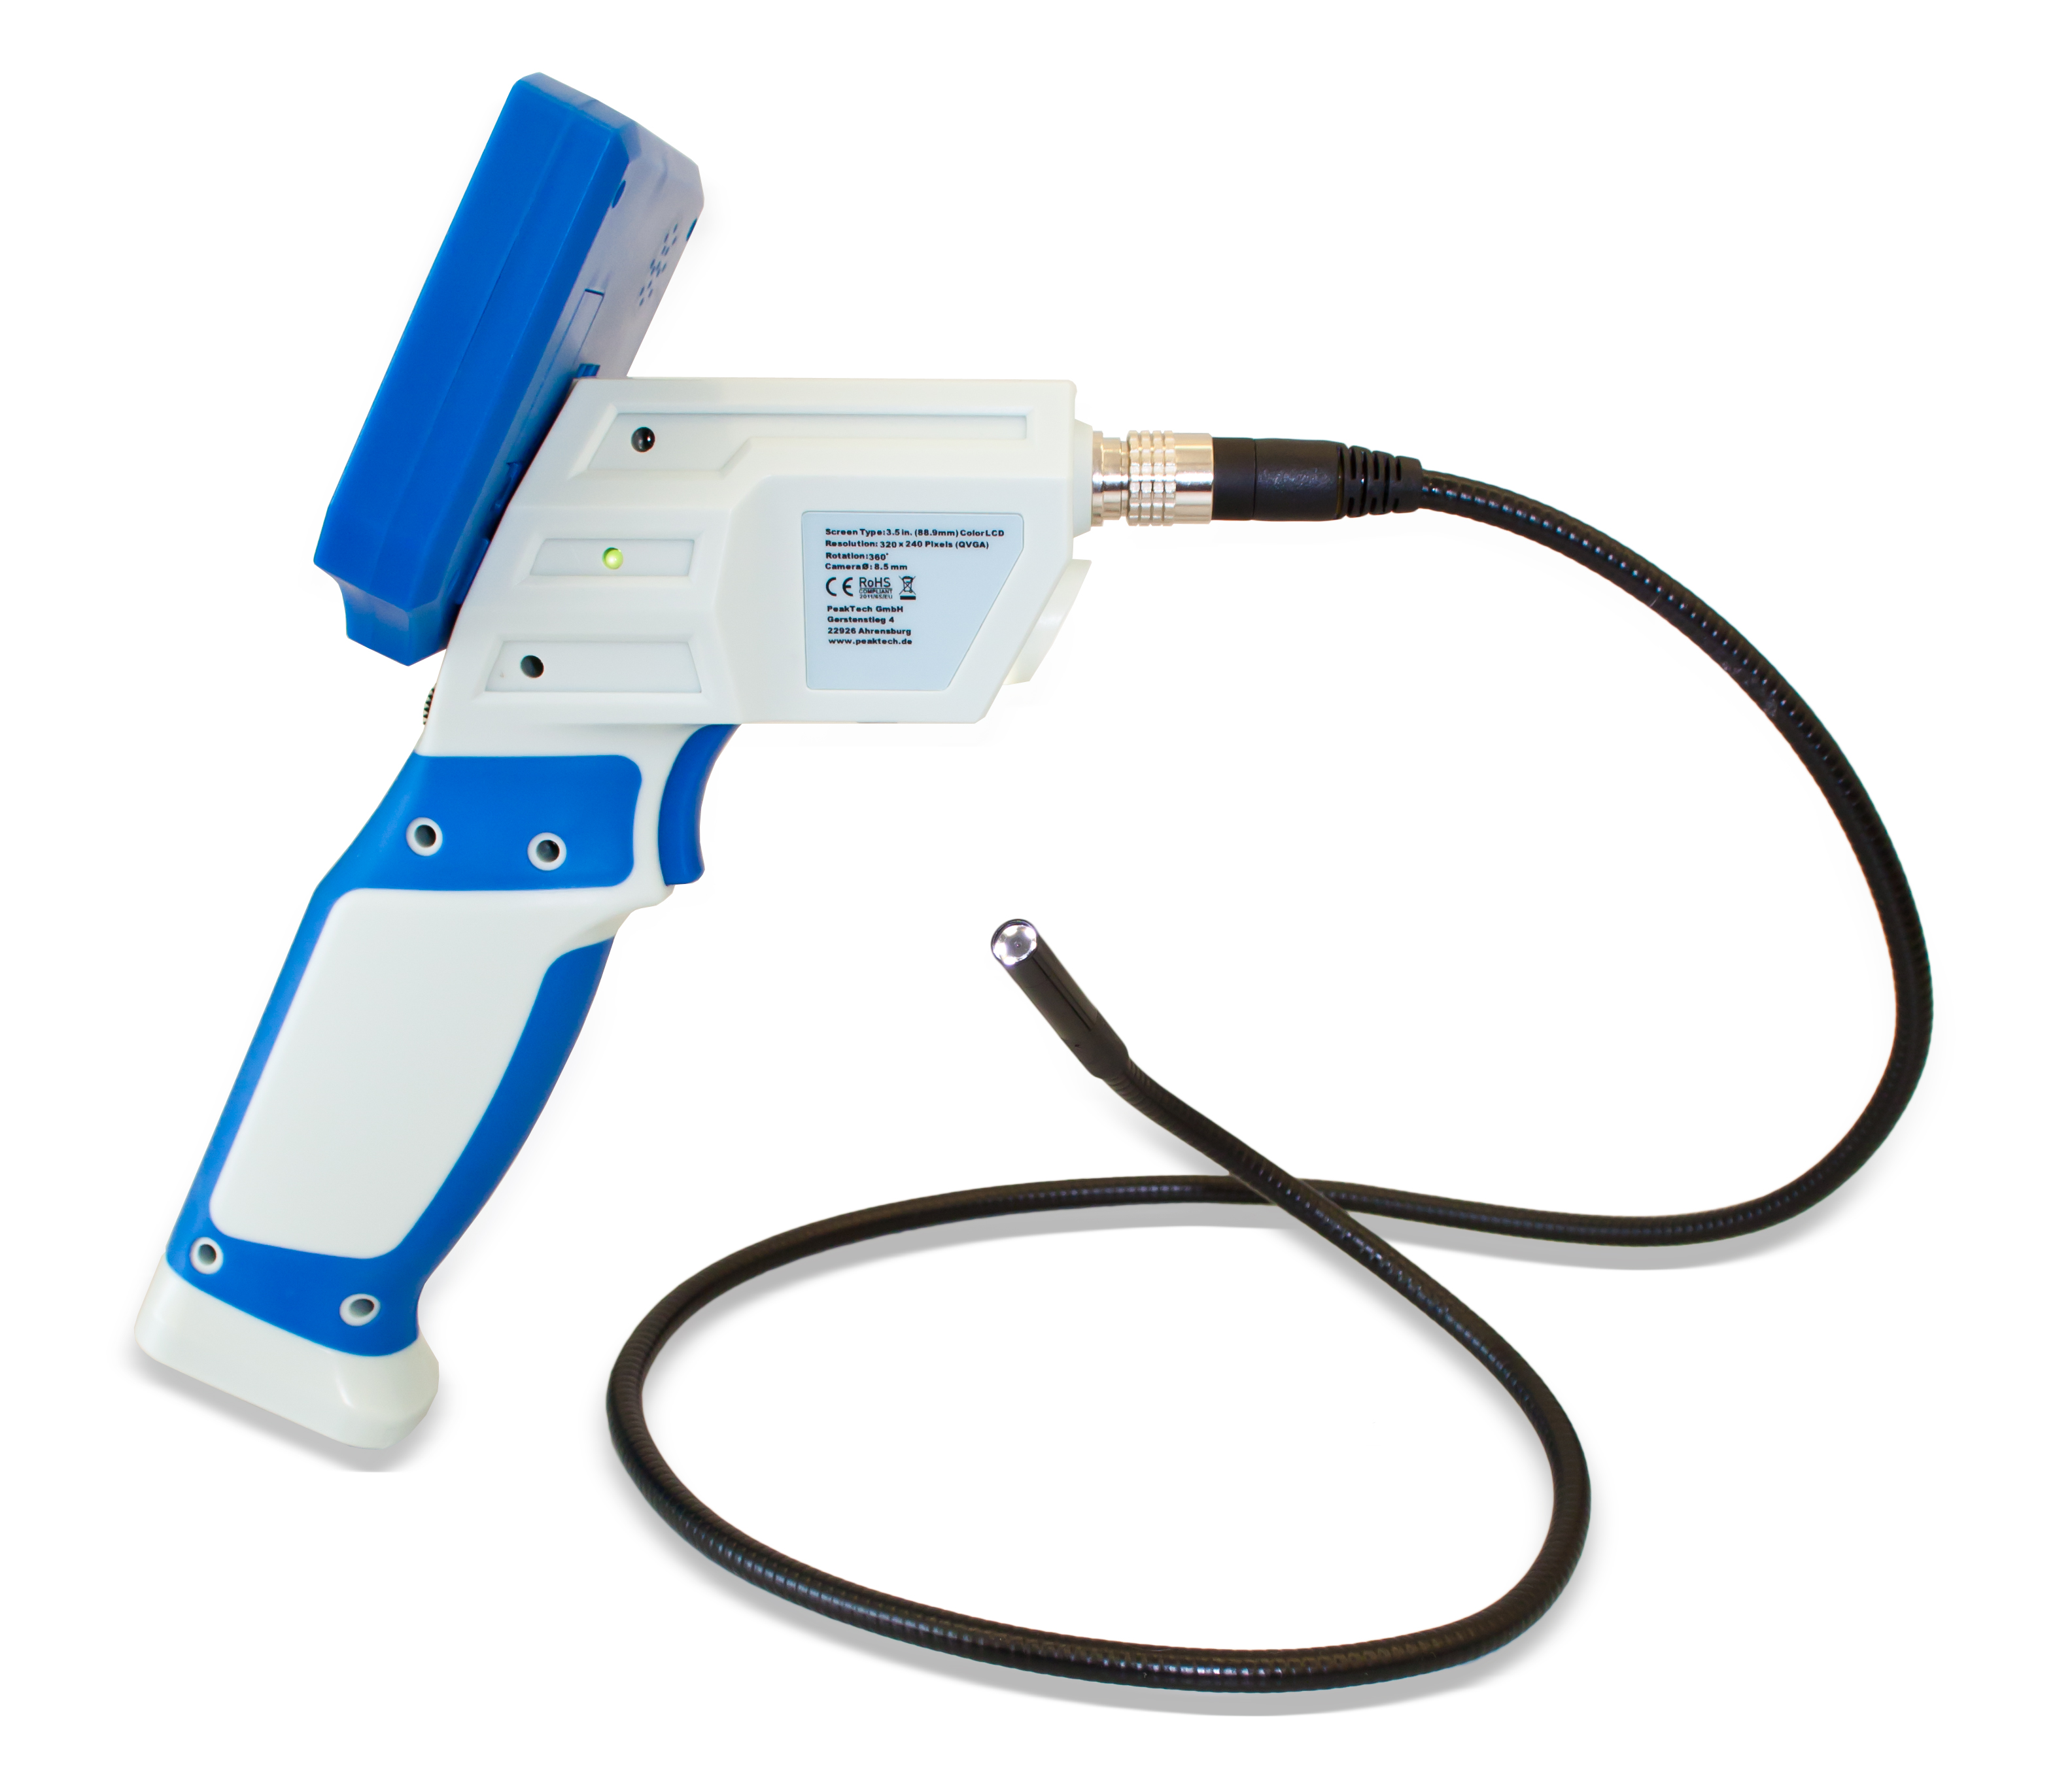 «PeakTech® P 5600» Video Borescope, Color TFT, USB and SD card